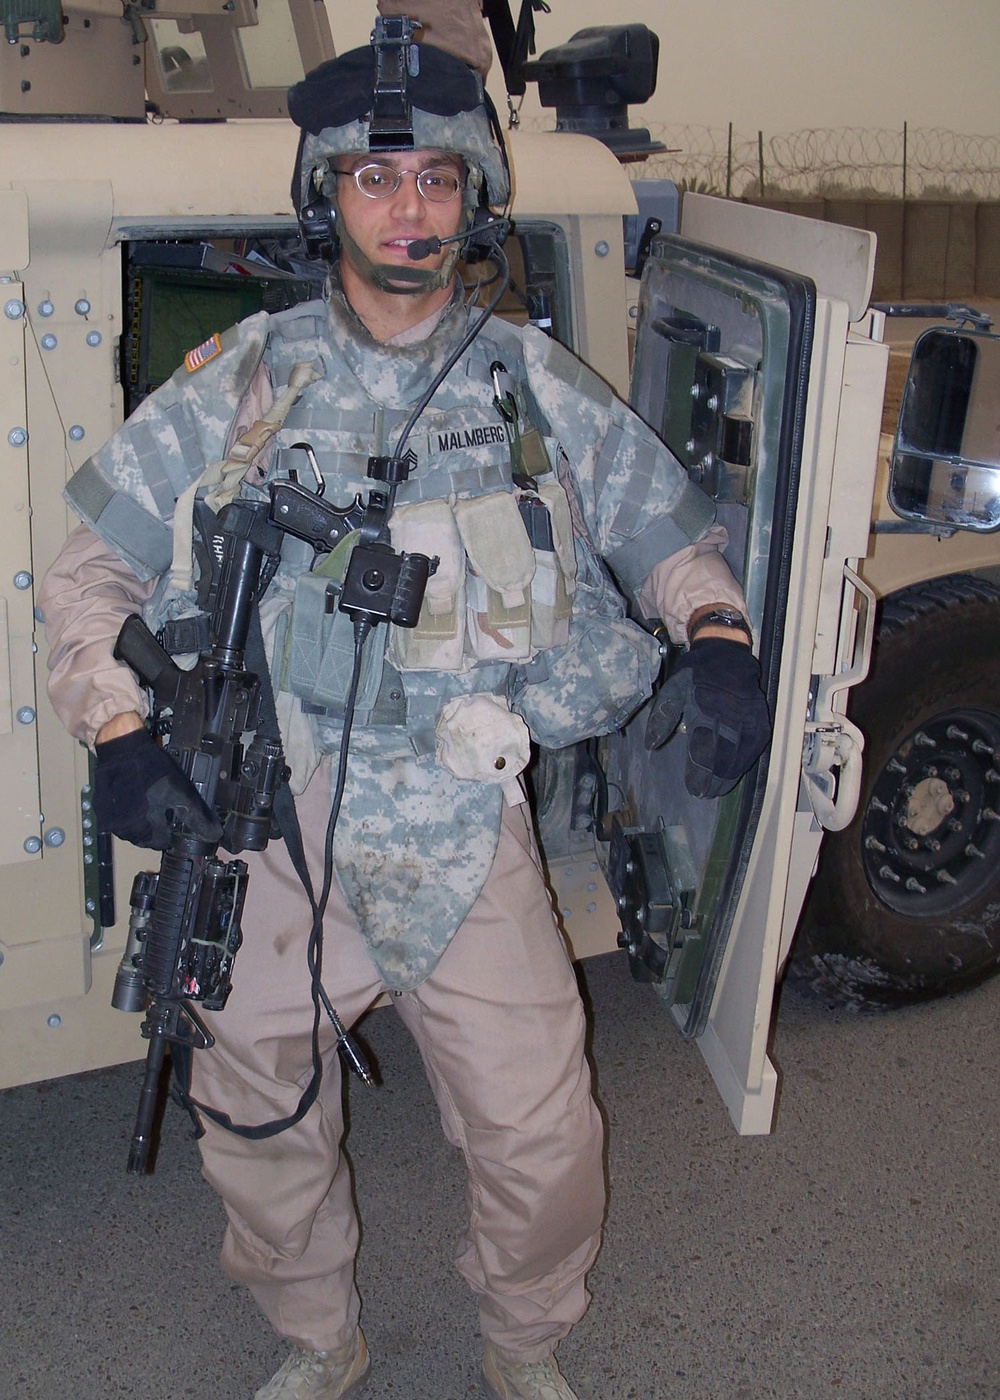 Exiting the Humvee